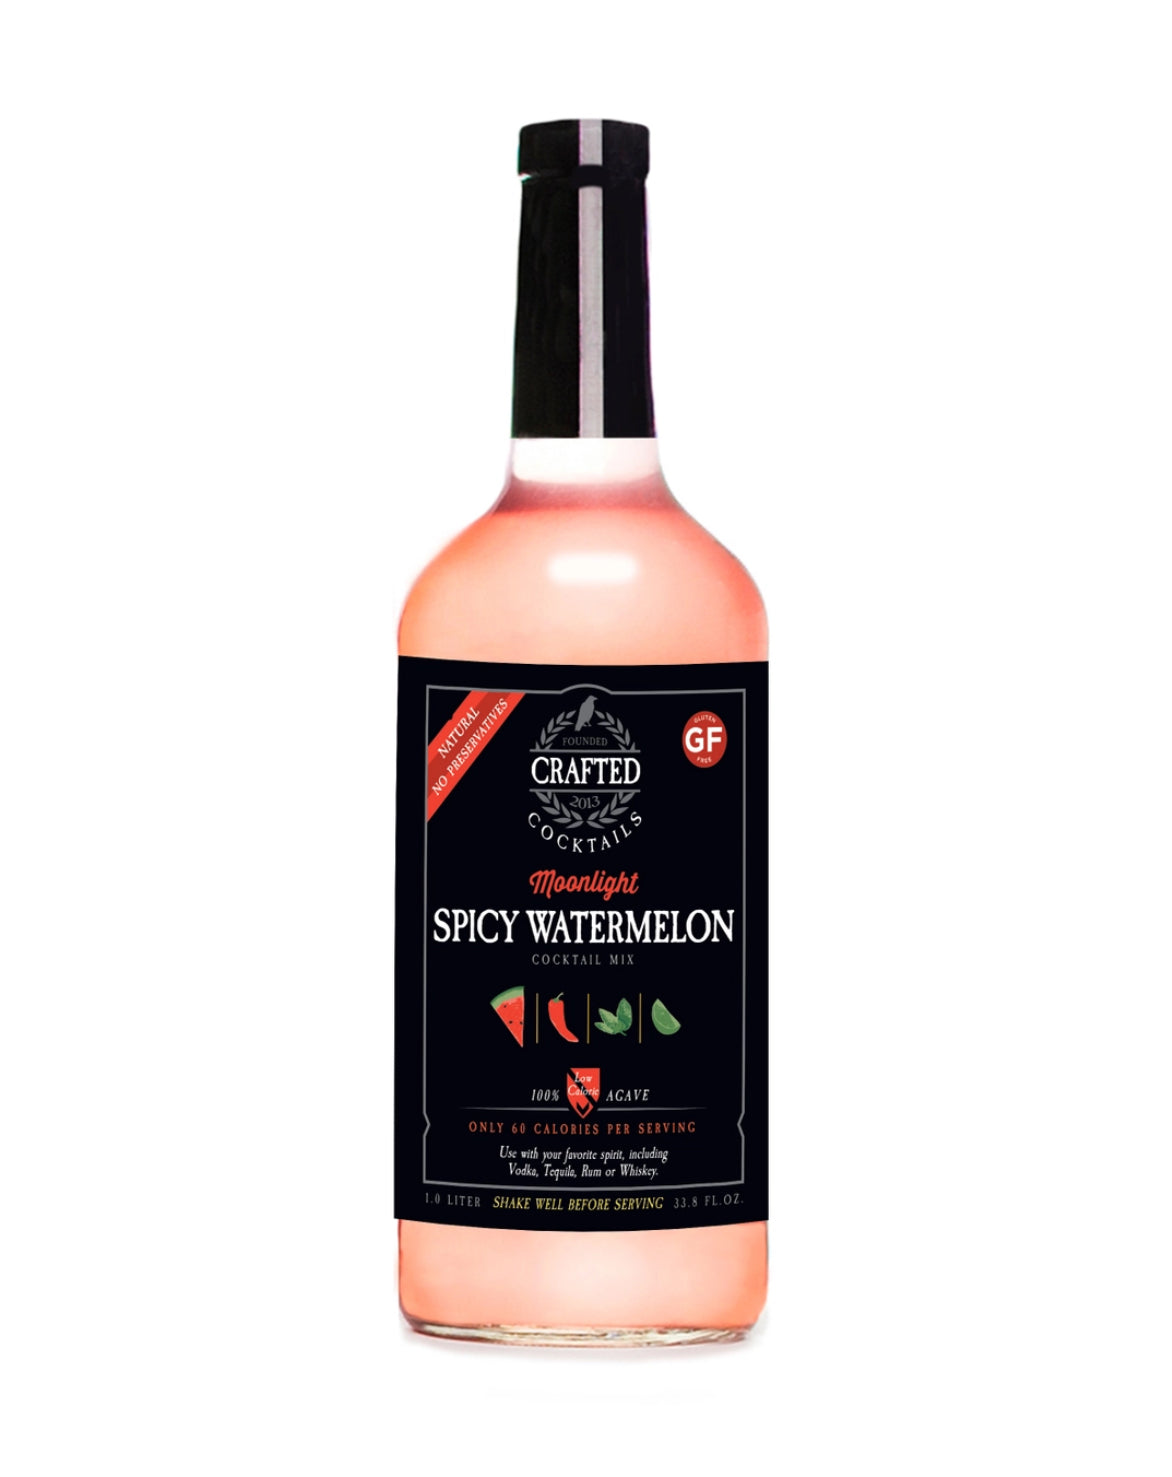 Spicy Watermelon Cocktail or Mocktail Mix